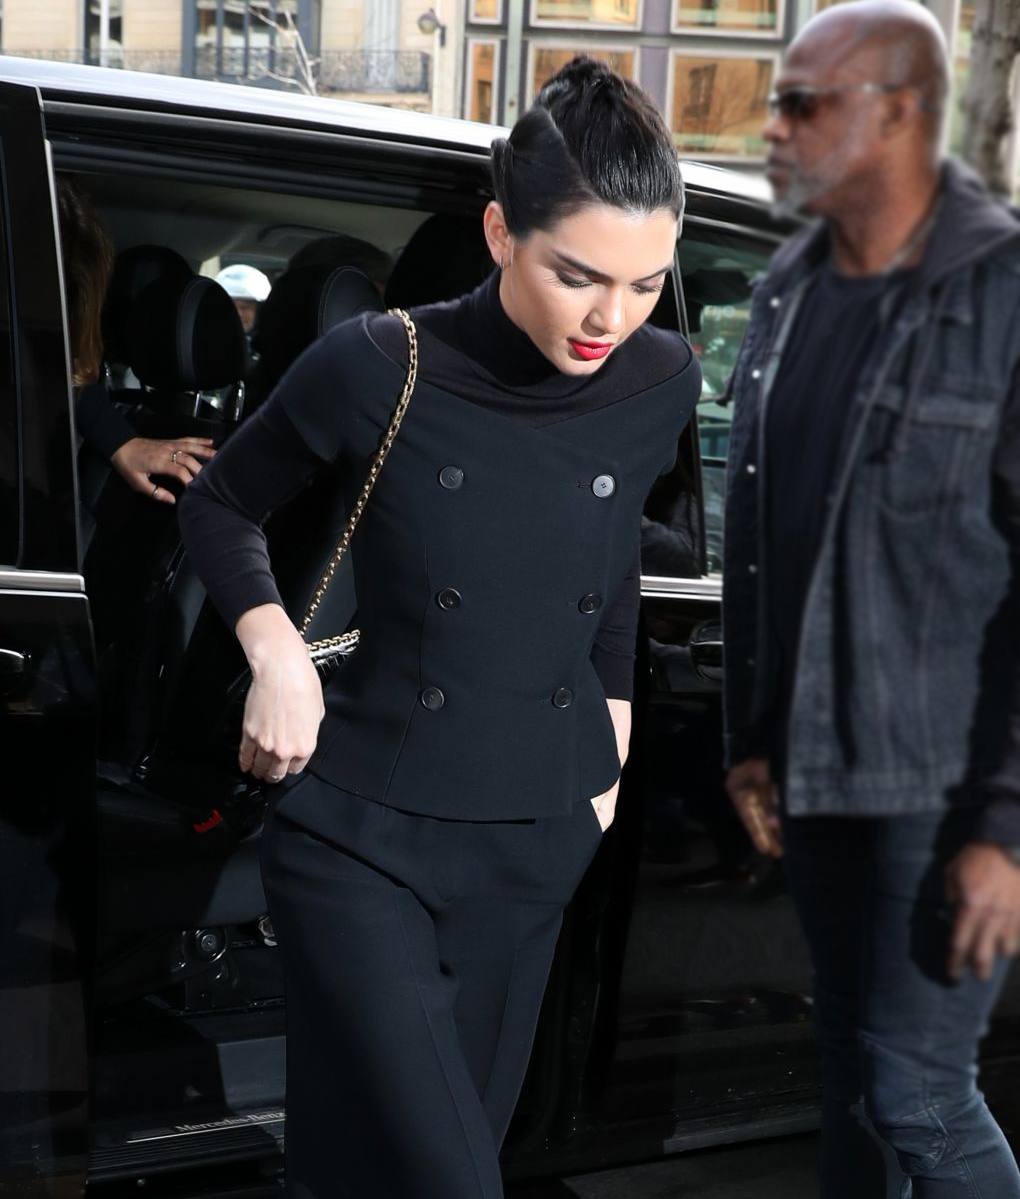 kendall-jenner-leaving-at-four-seasons-hotel-george